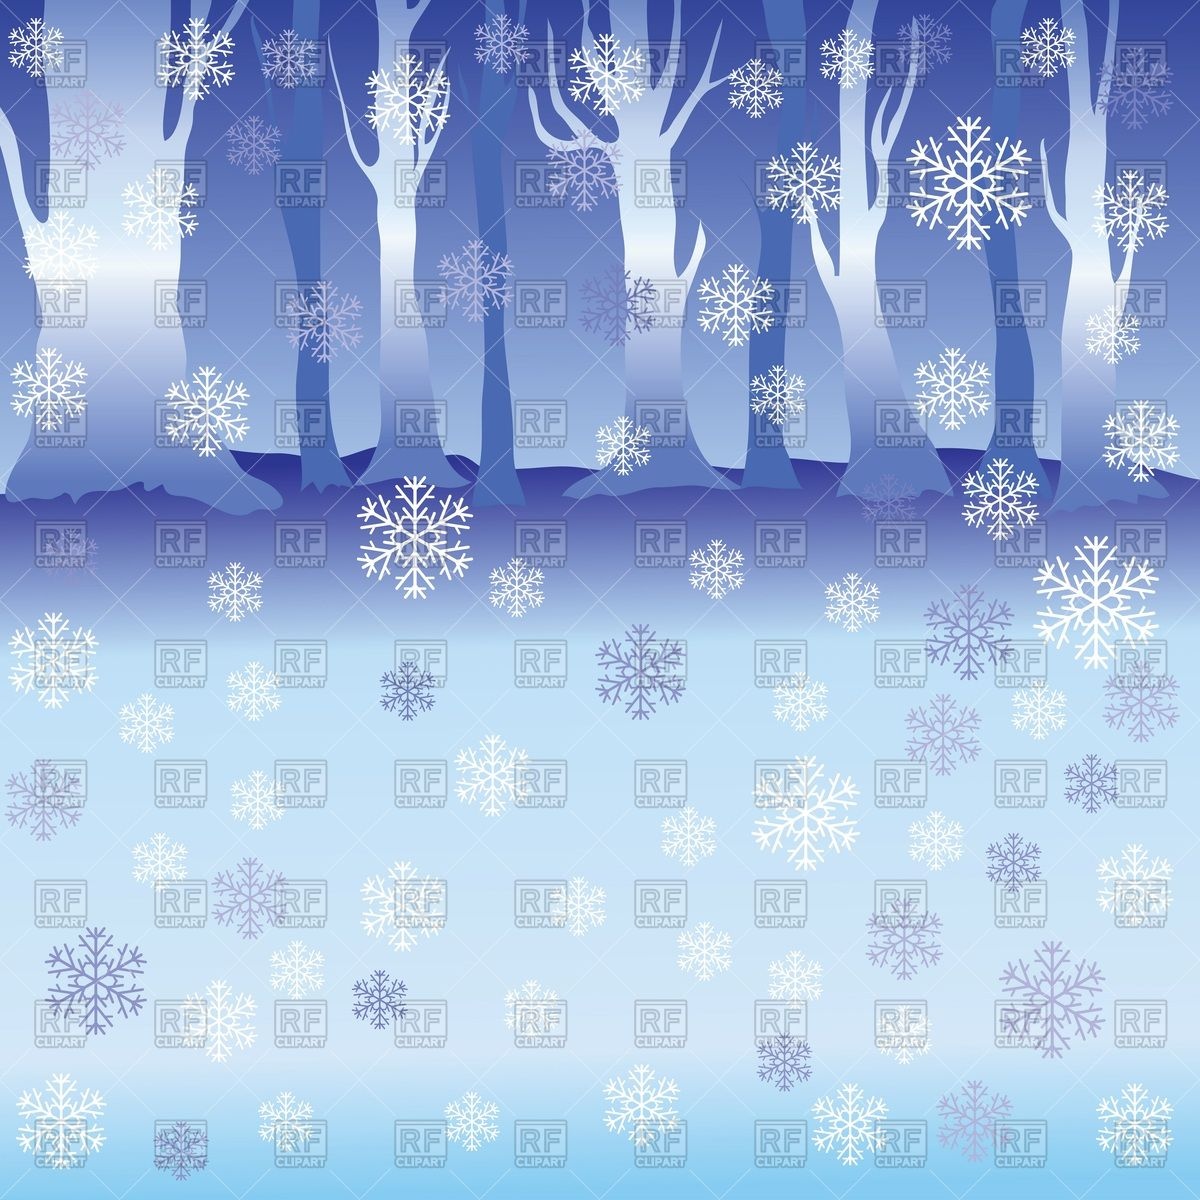 Winter Landscape With Snow And Forest Silhouette Download Royalty